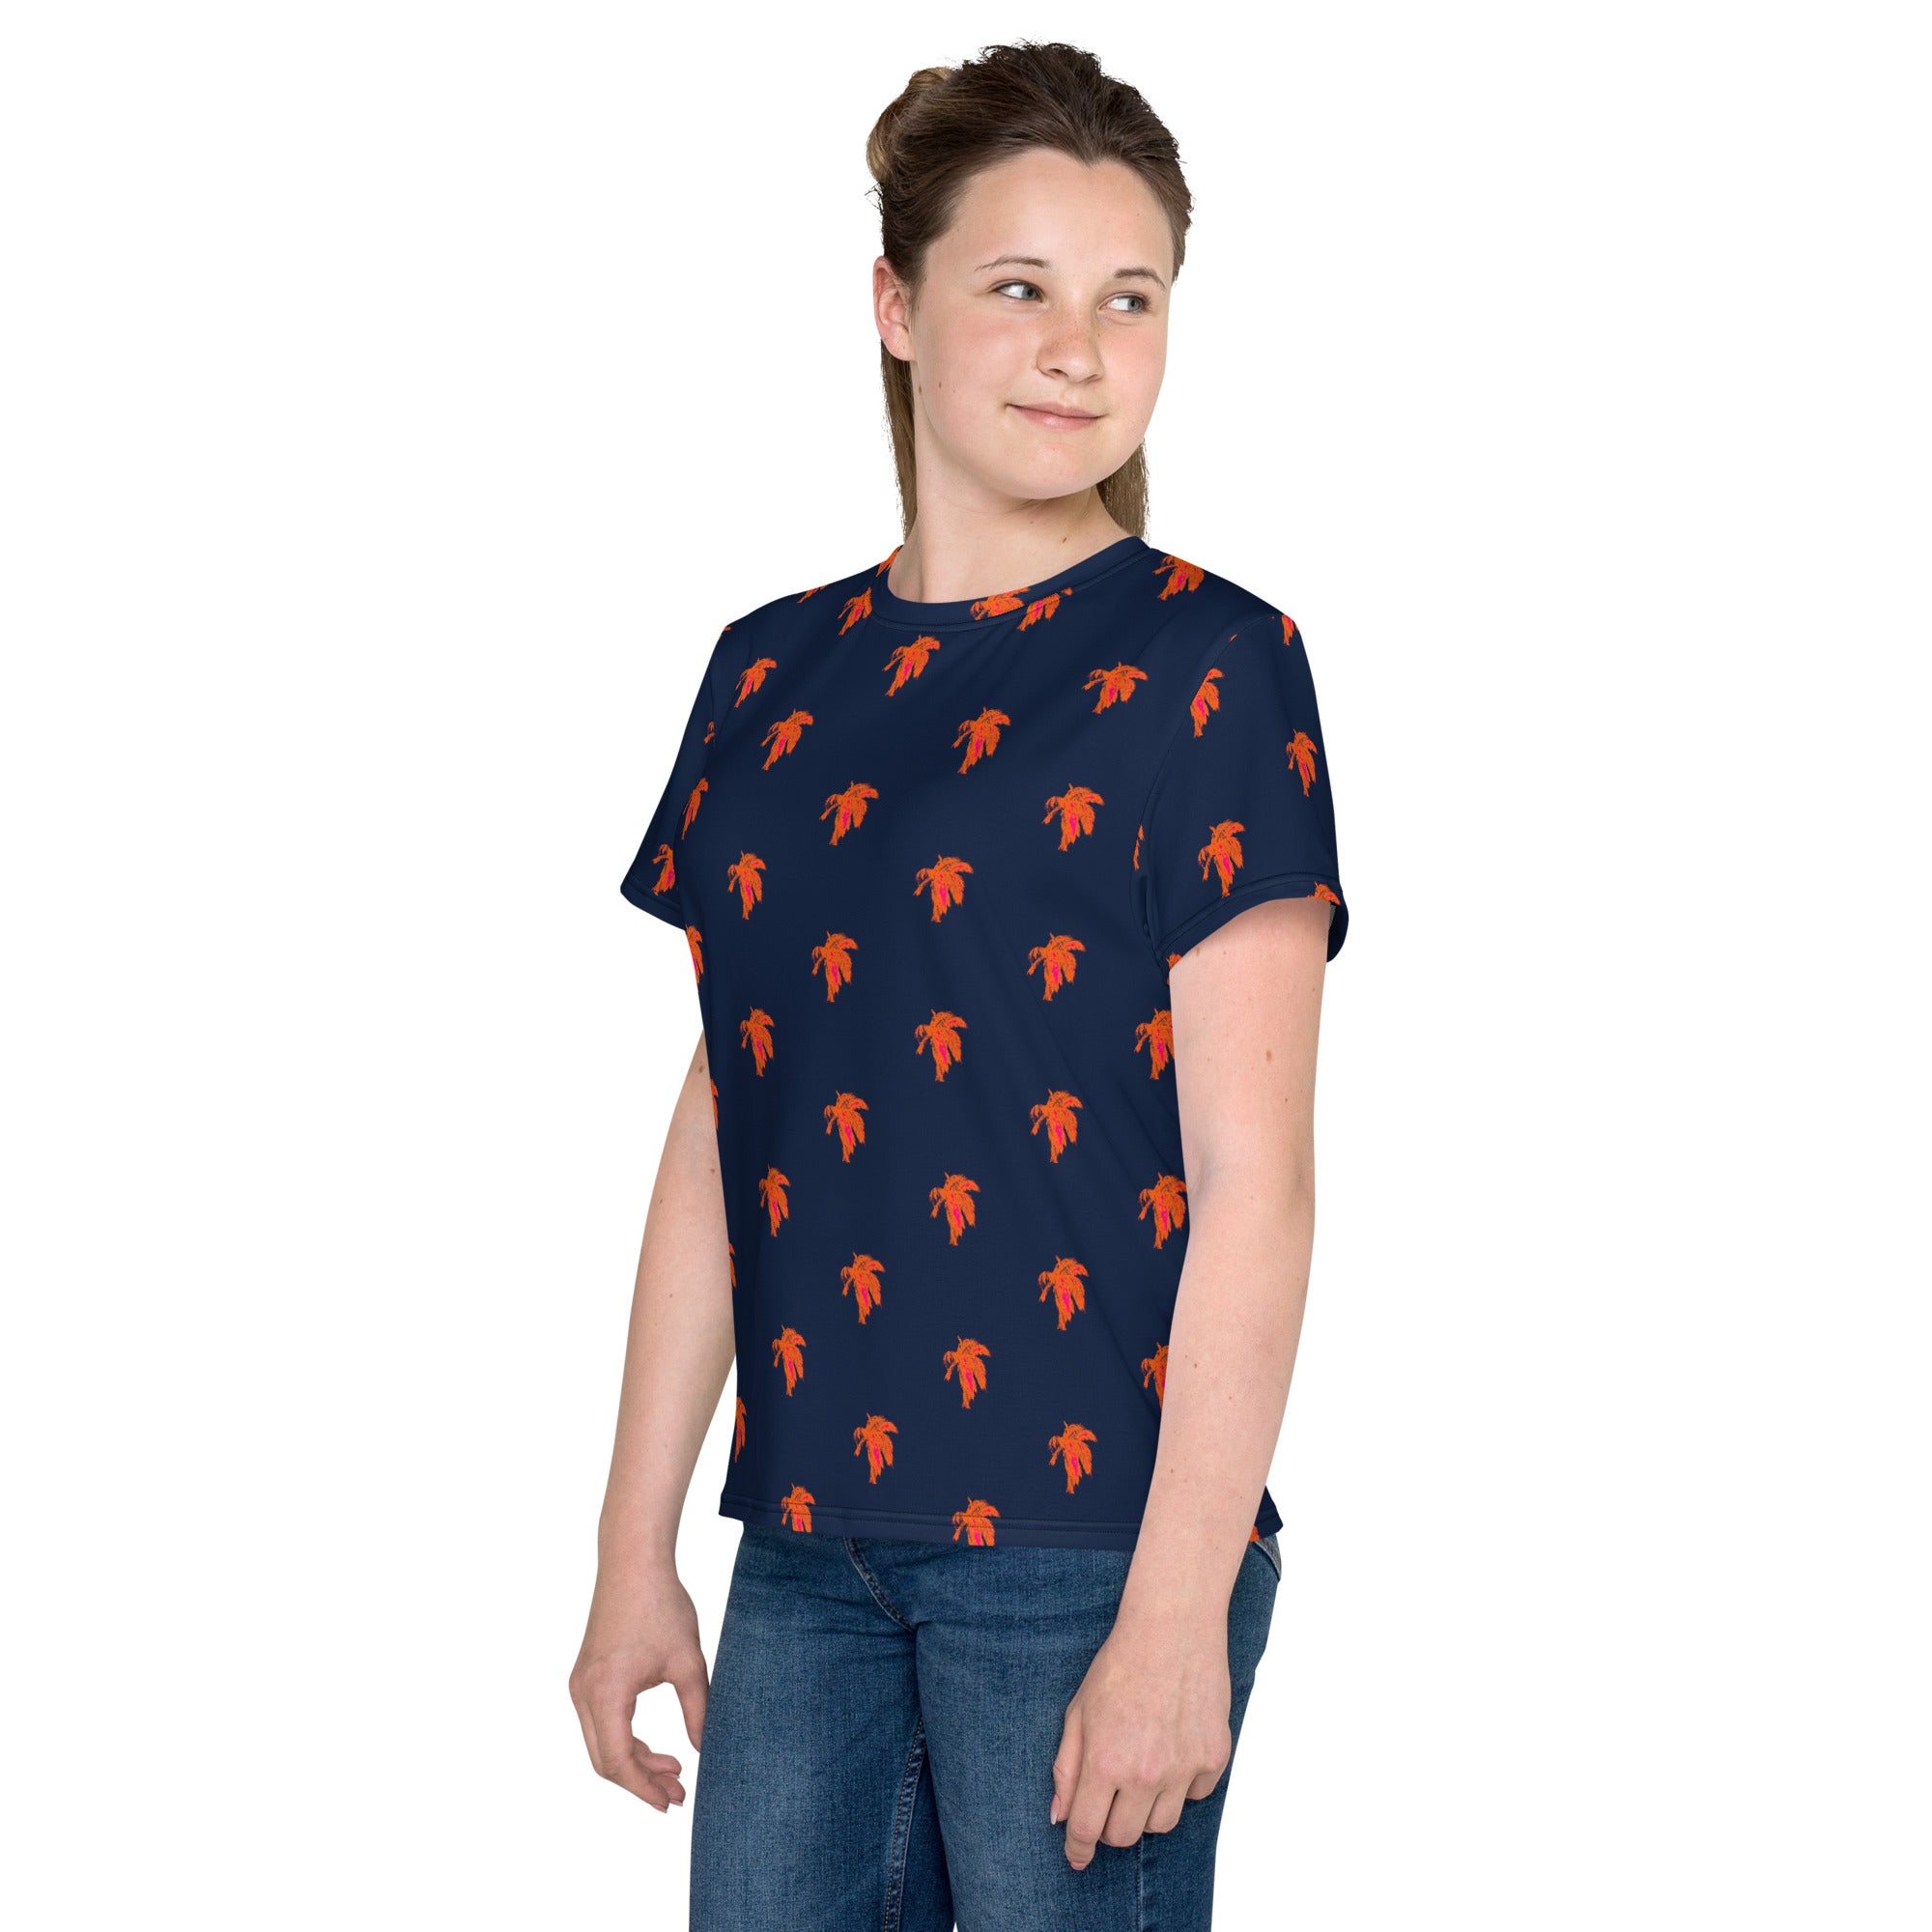 neon palm navy Youth crew neck t-shirt